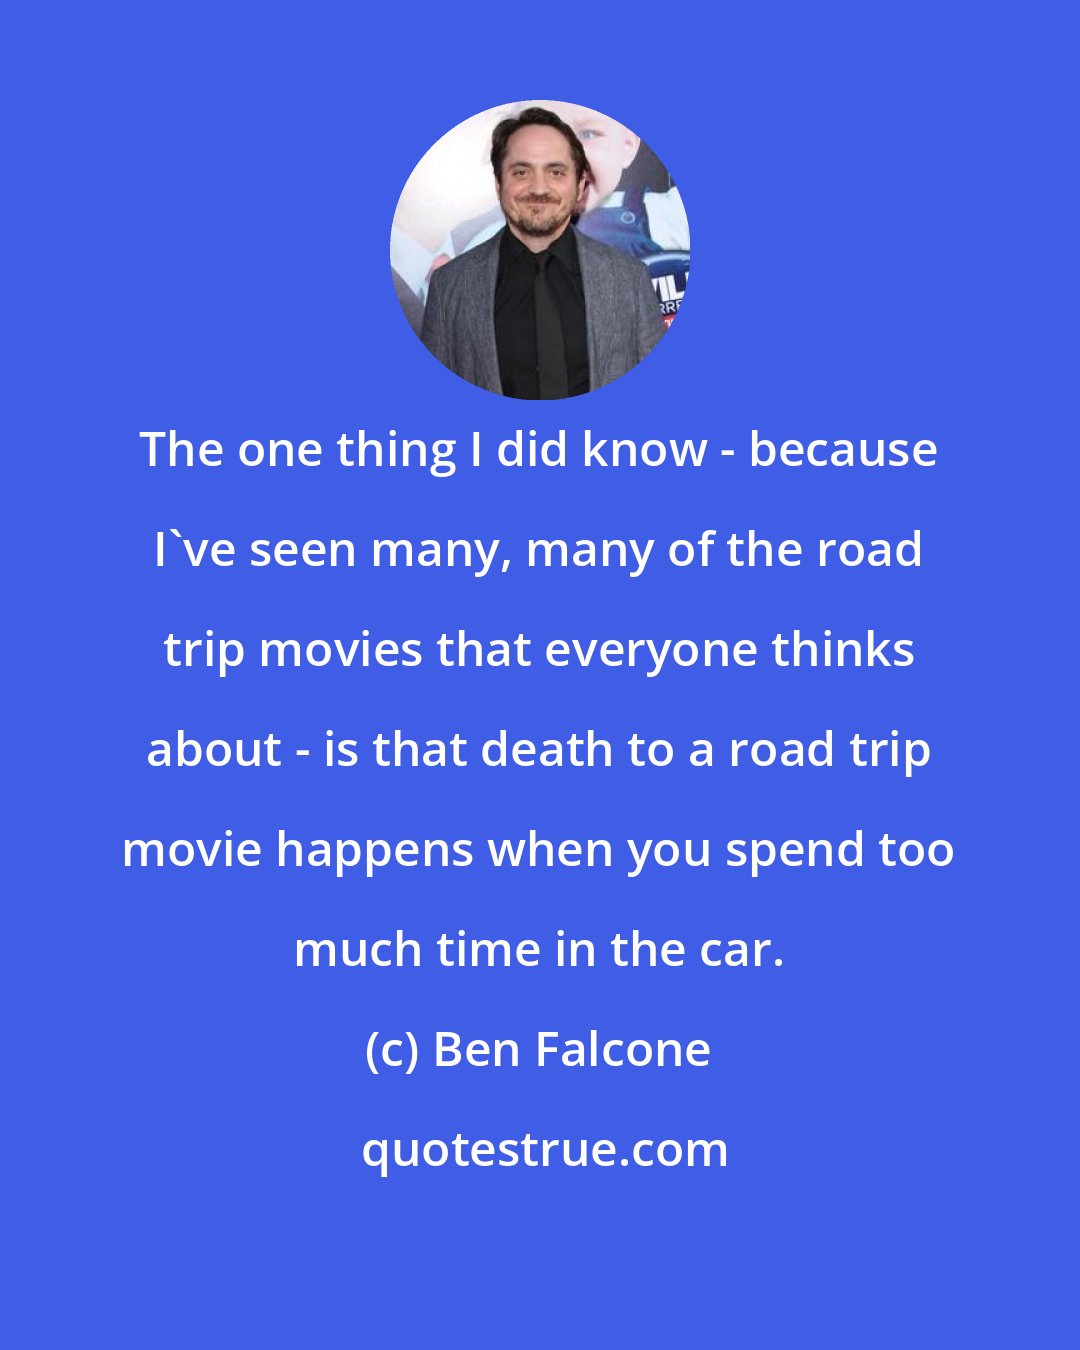 Ben Falcone: The one thing I did know - because I've seen many, many of the road trip movies that everyone thinks about - is that death to a road trip movie happens when you spend too much time in the car.